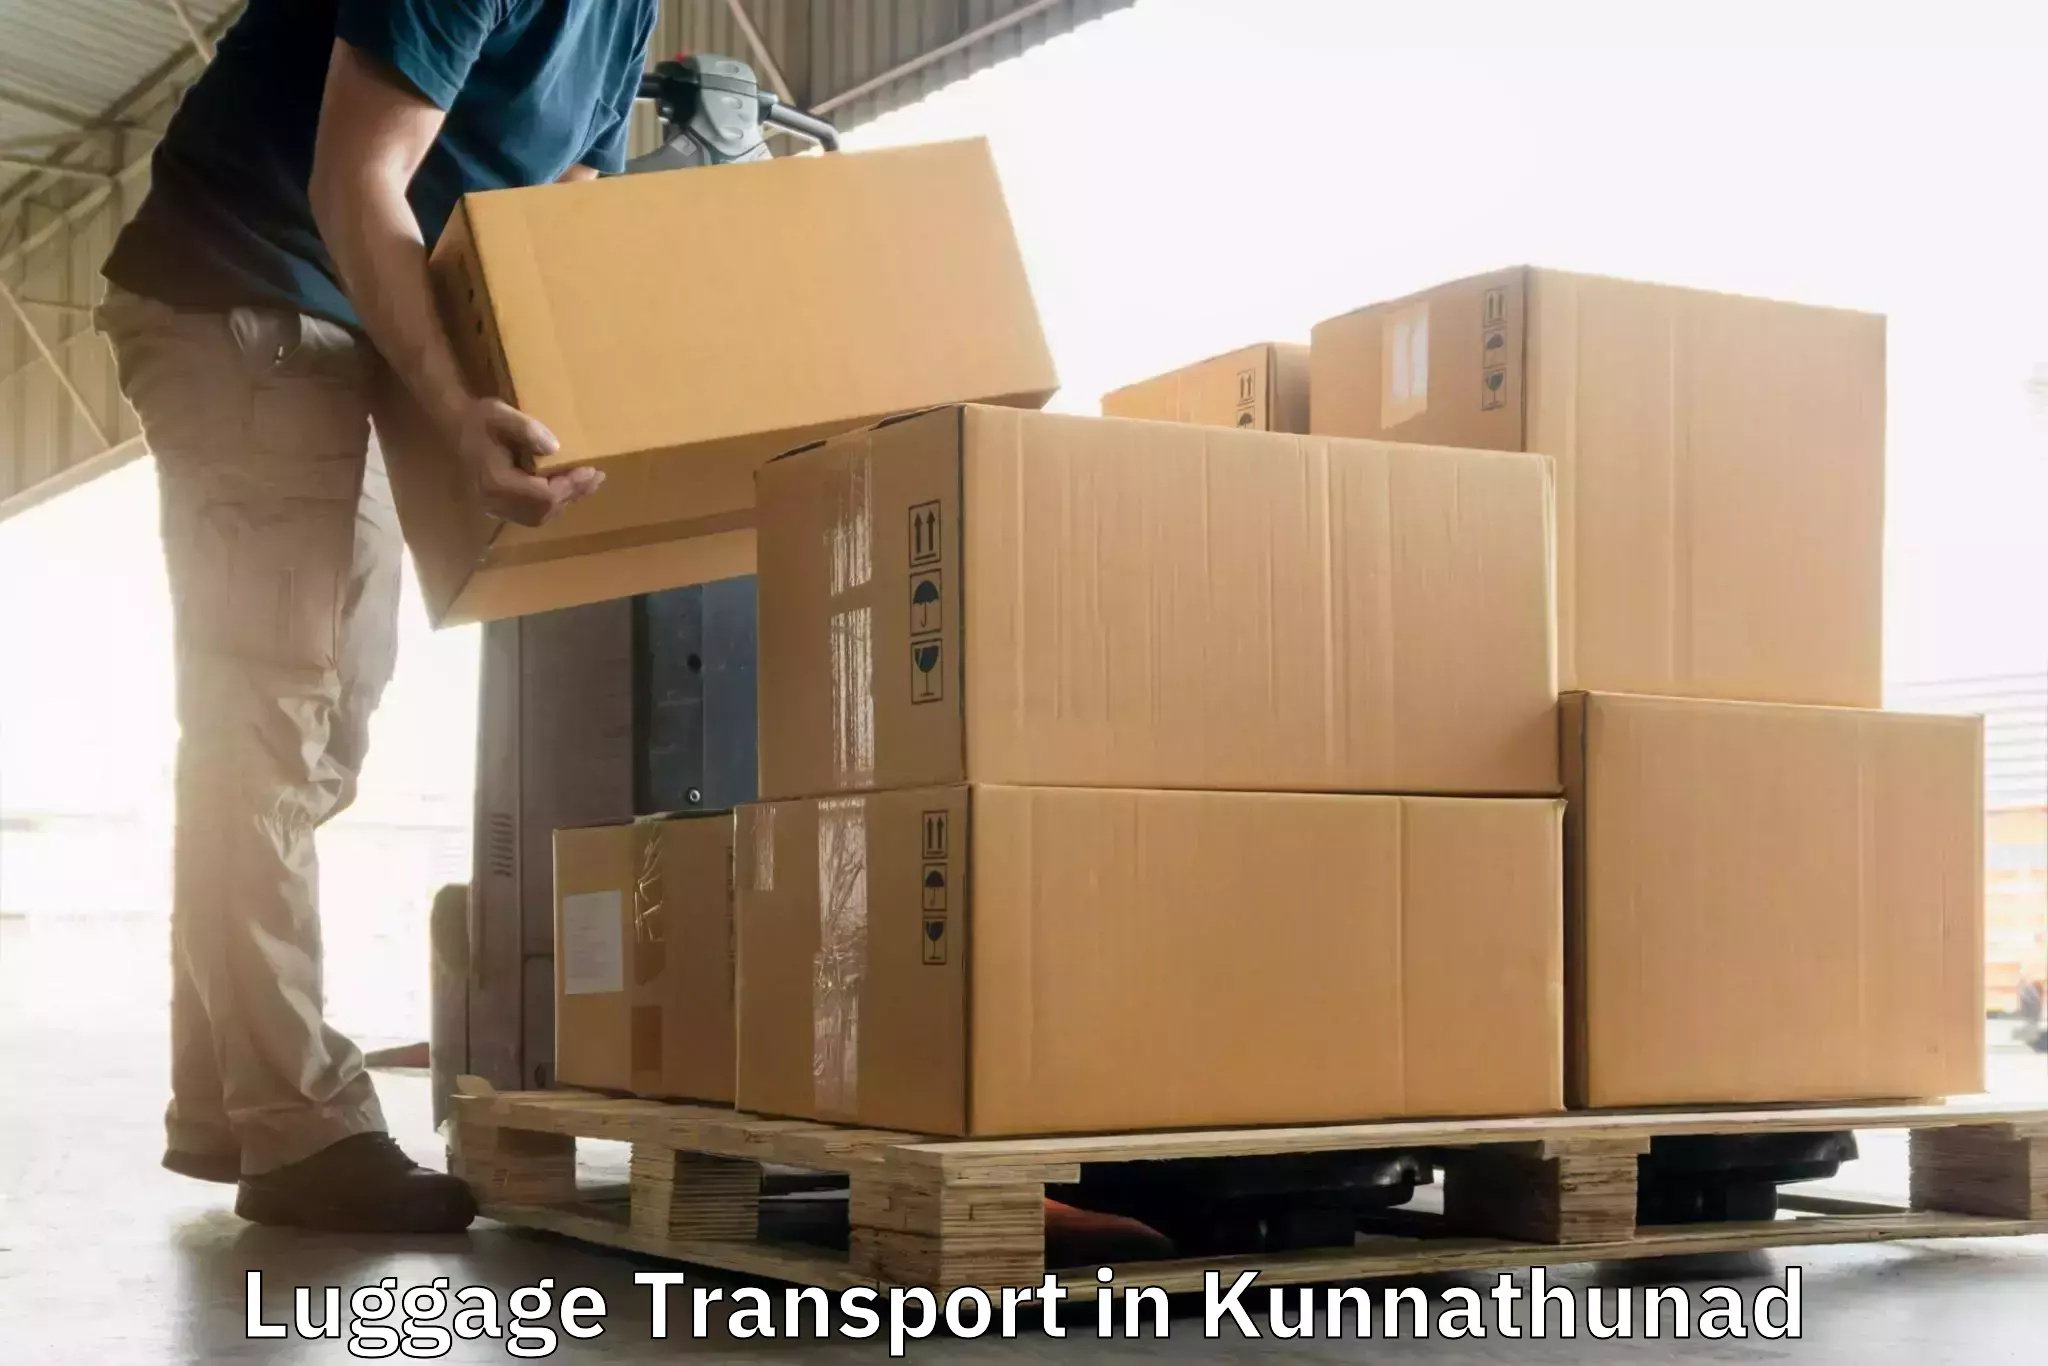 Luggage storage and delivery in Kunnathunad